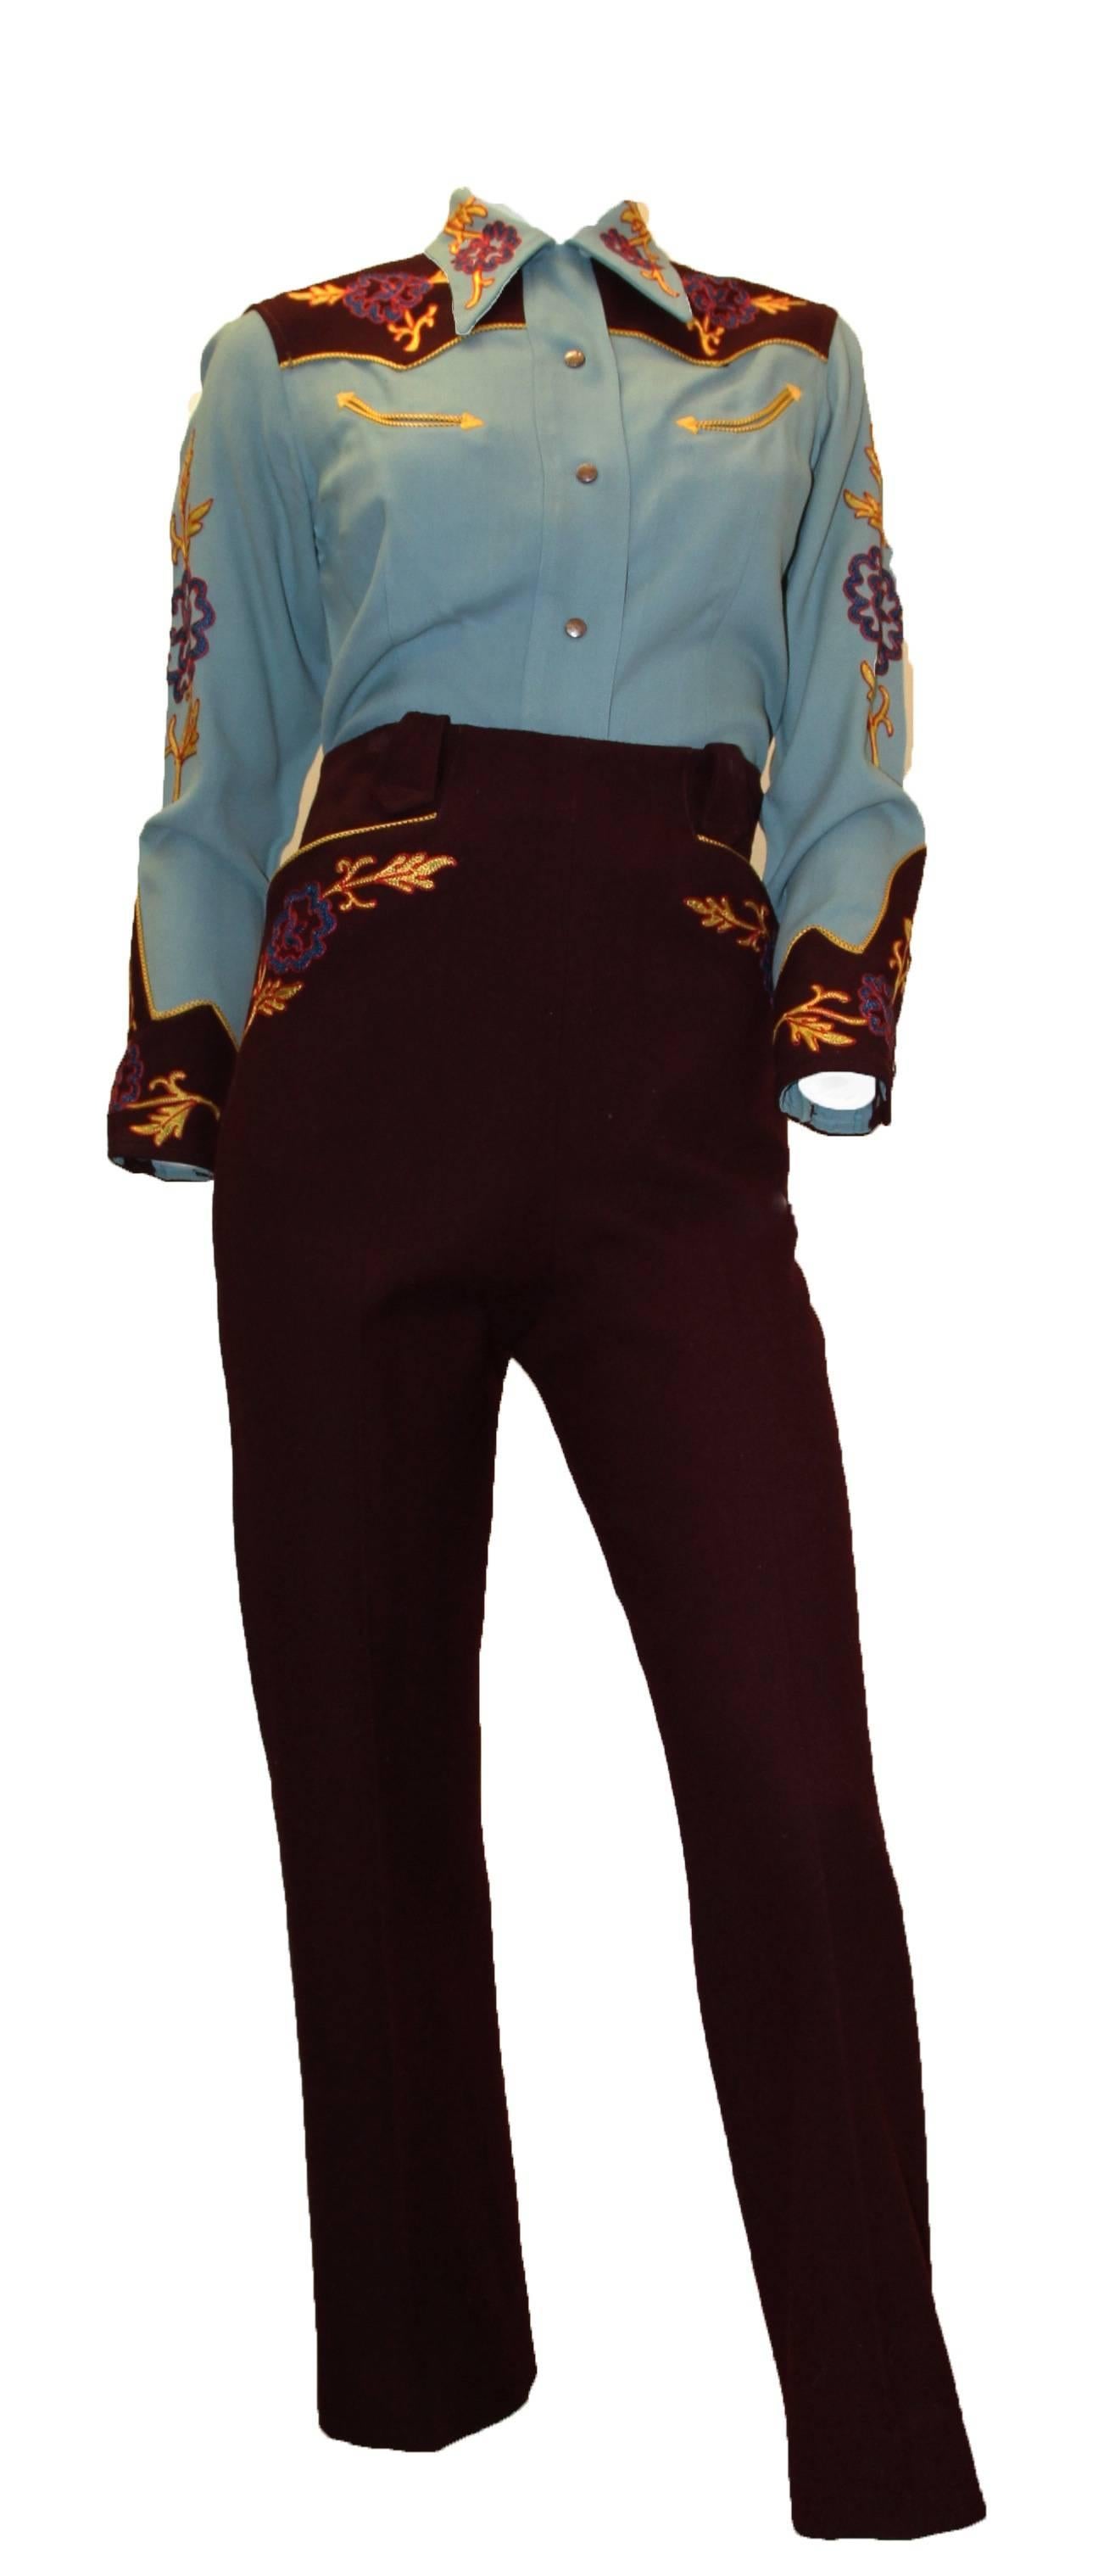 1940s maroon and slate blue Western shirt and high waisted pant set with contrast yellow, red, and blue embroidery. Wool gabardine. Pearlized snap button closure on shirt front and cuffs. Functional piped smile pockets. Side zip closure on pant.